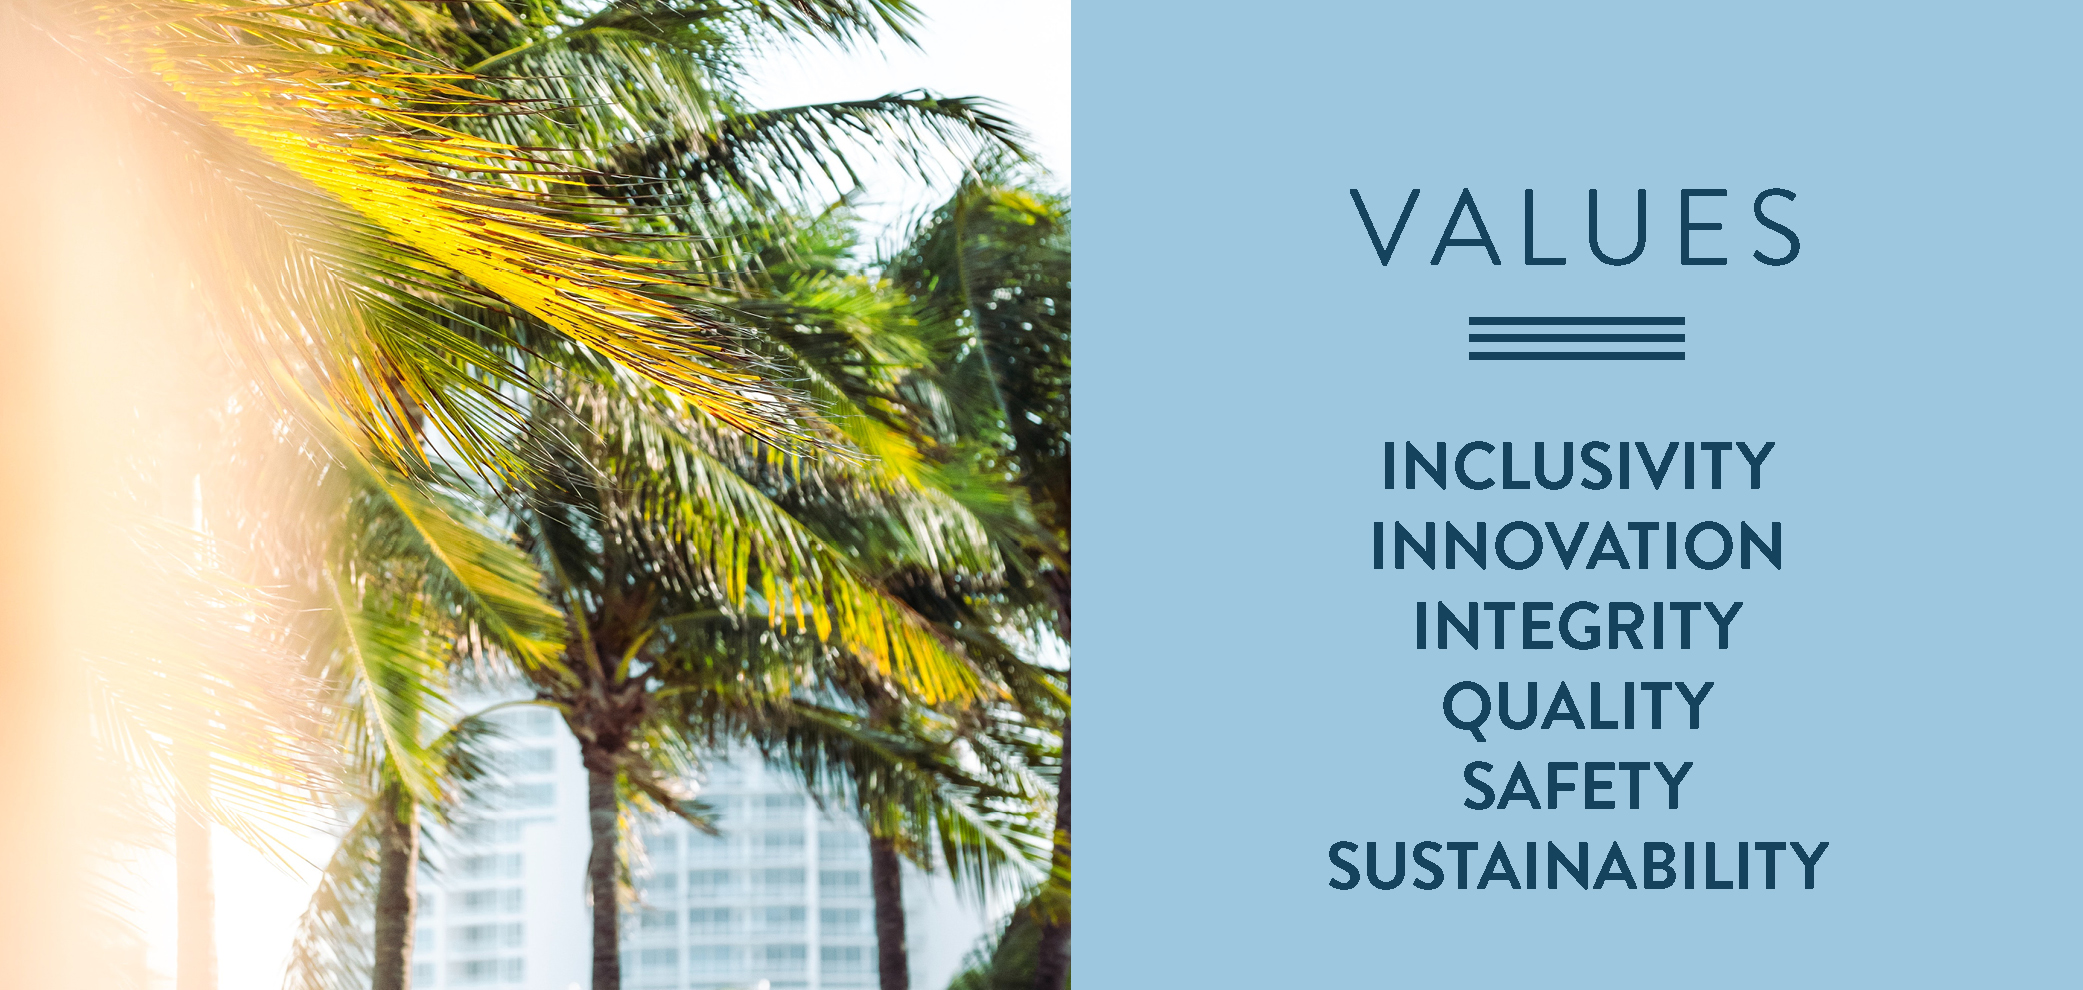 Values. integrity, safety, innovation quality, sustainability, inclusivity